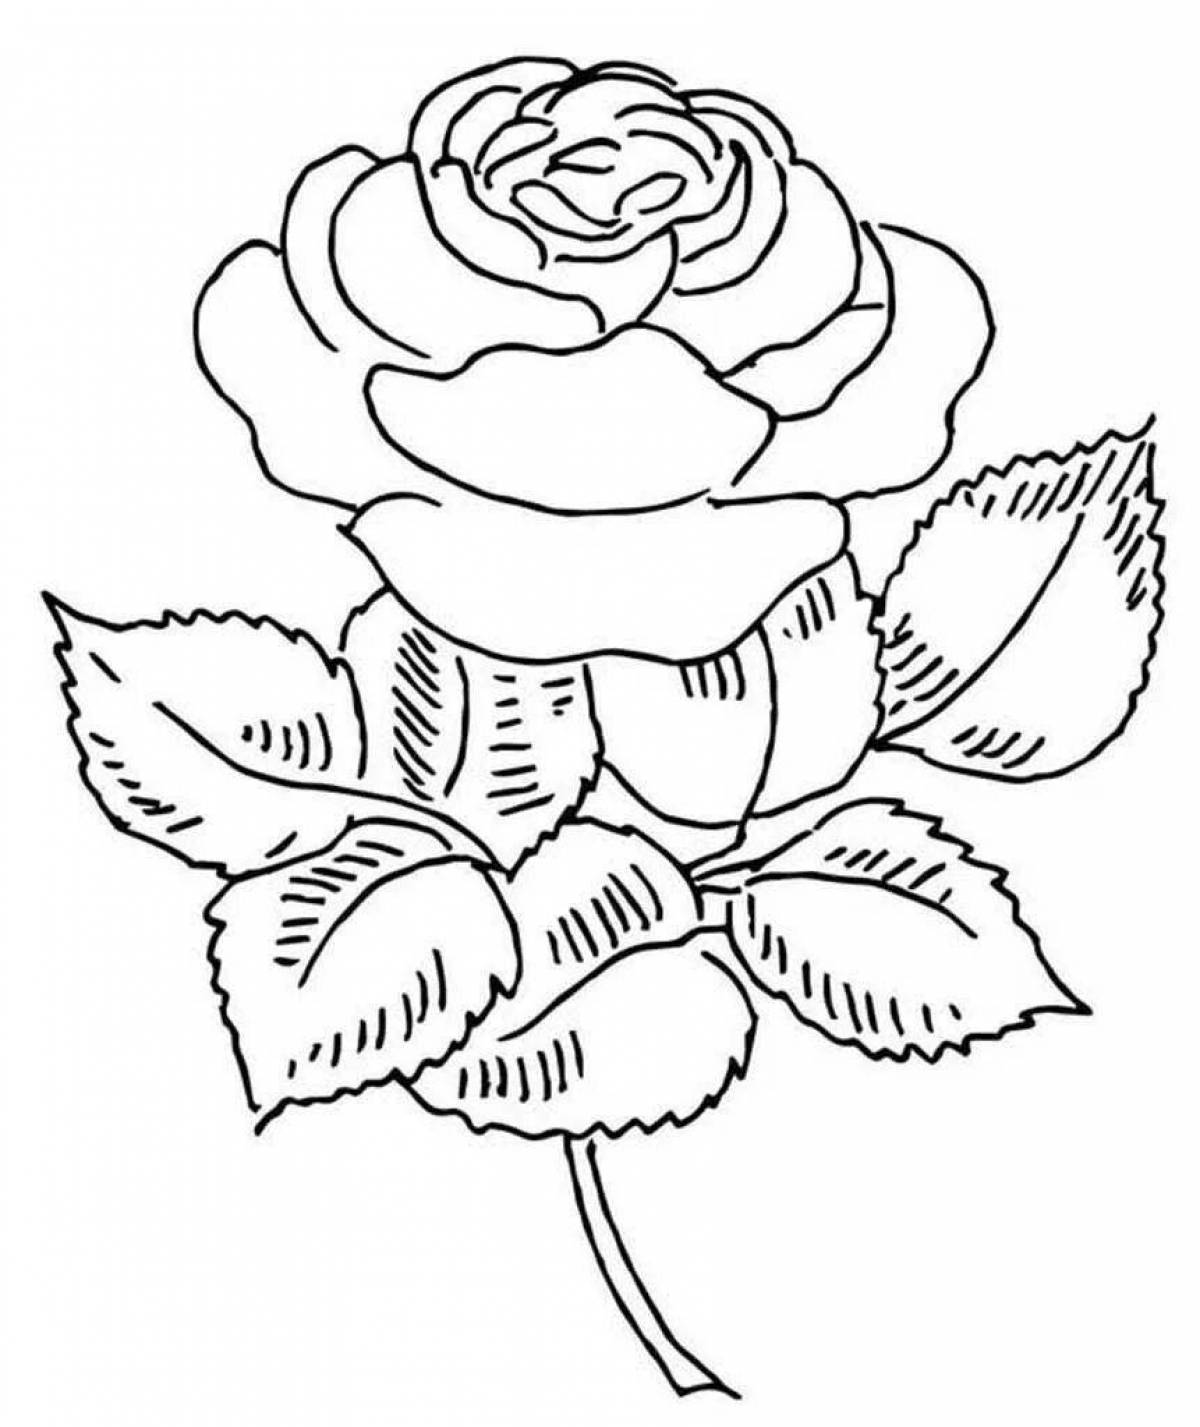 Luminous rose coloring pages